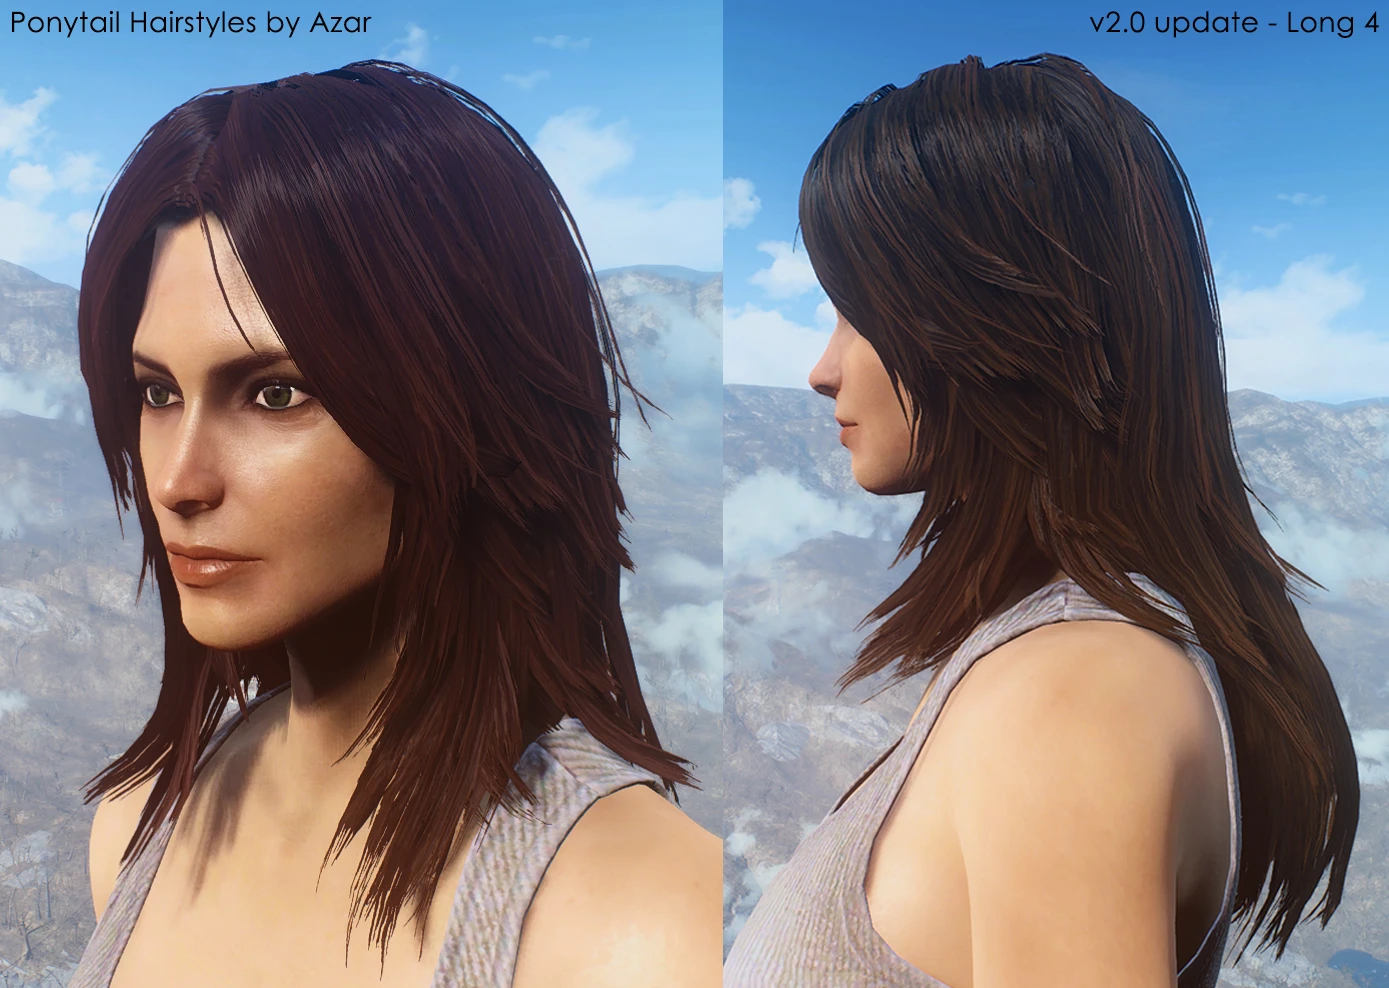 Ponytail Hairstyles by Azar v2.0 at Fallout 4 Nexus - Mods ...